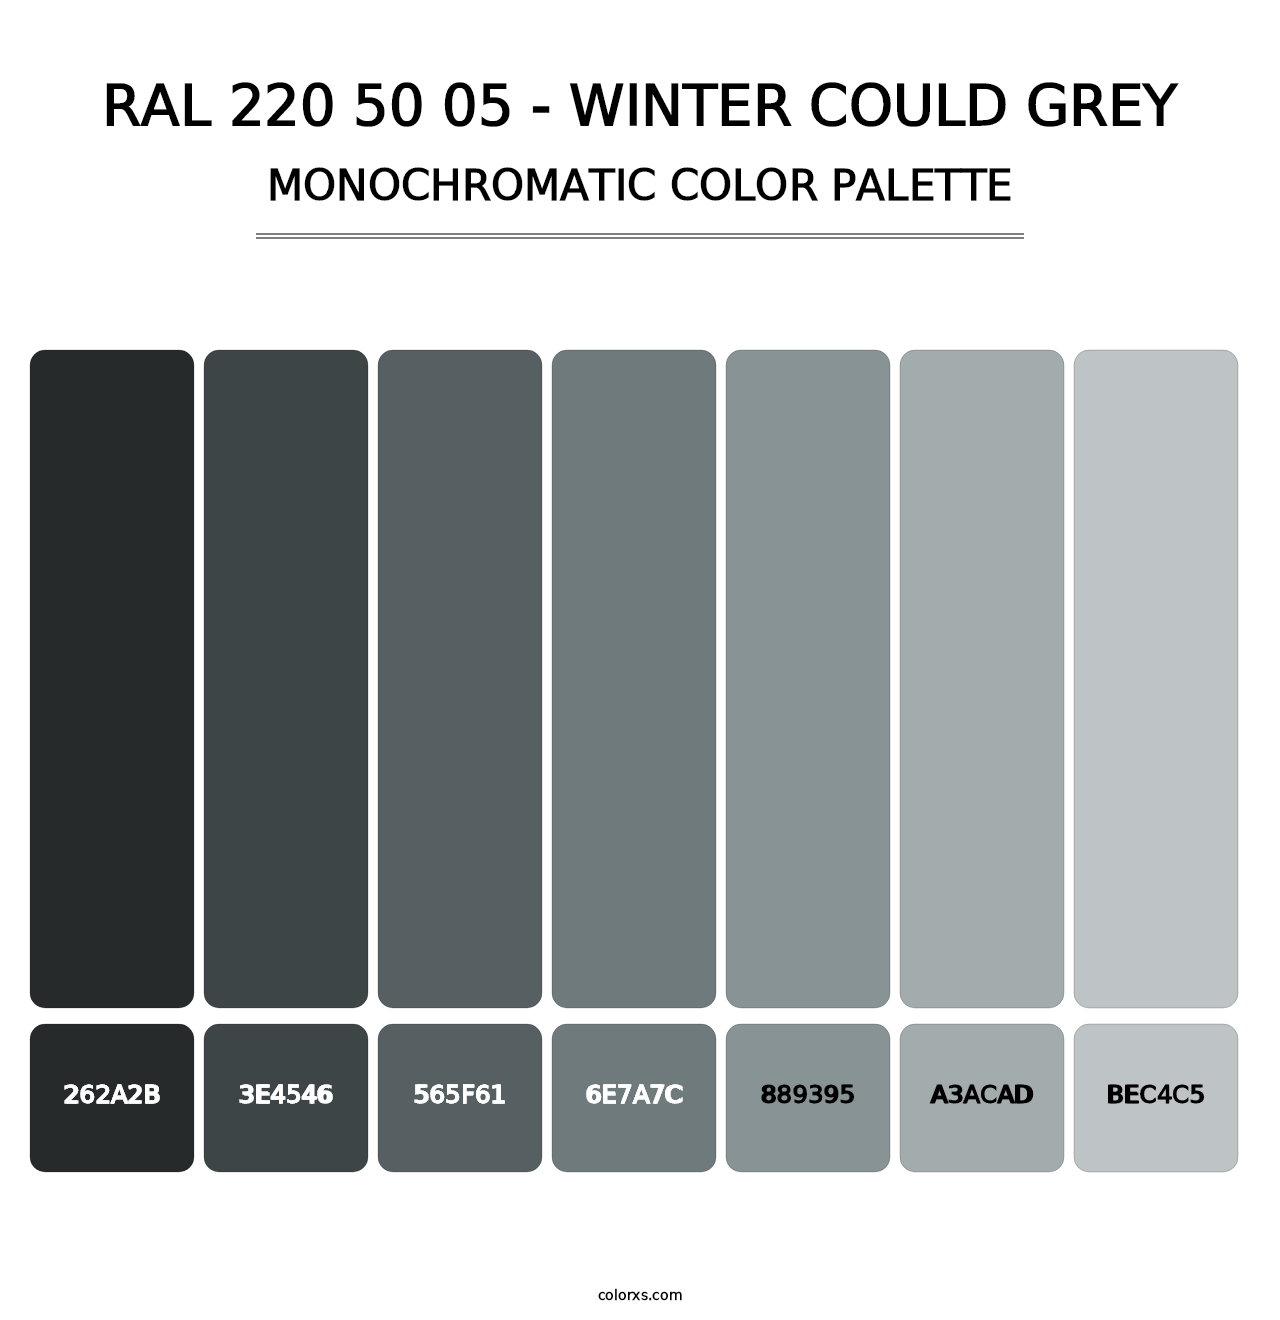 RAL 220 50 05 - Winter Could Grey - Monochromatic Color Palette